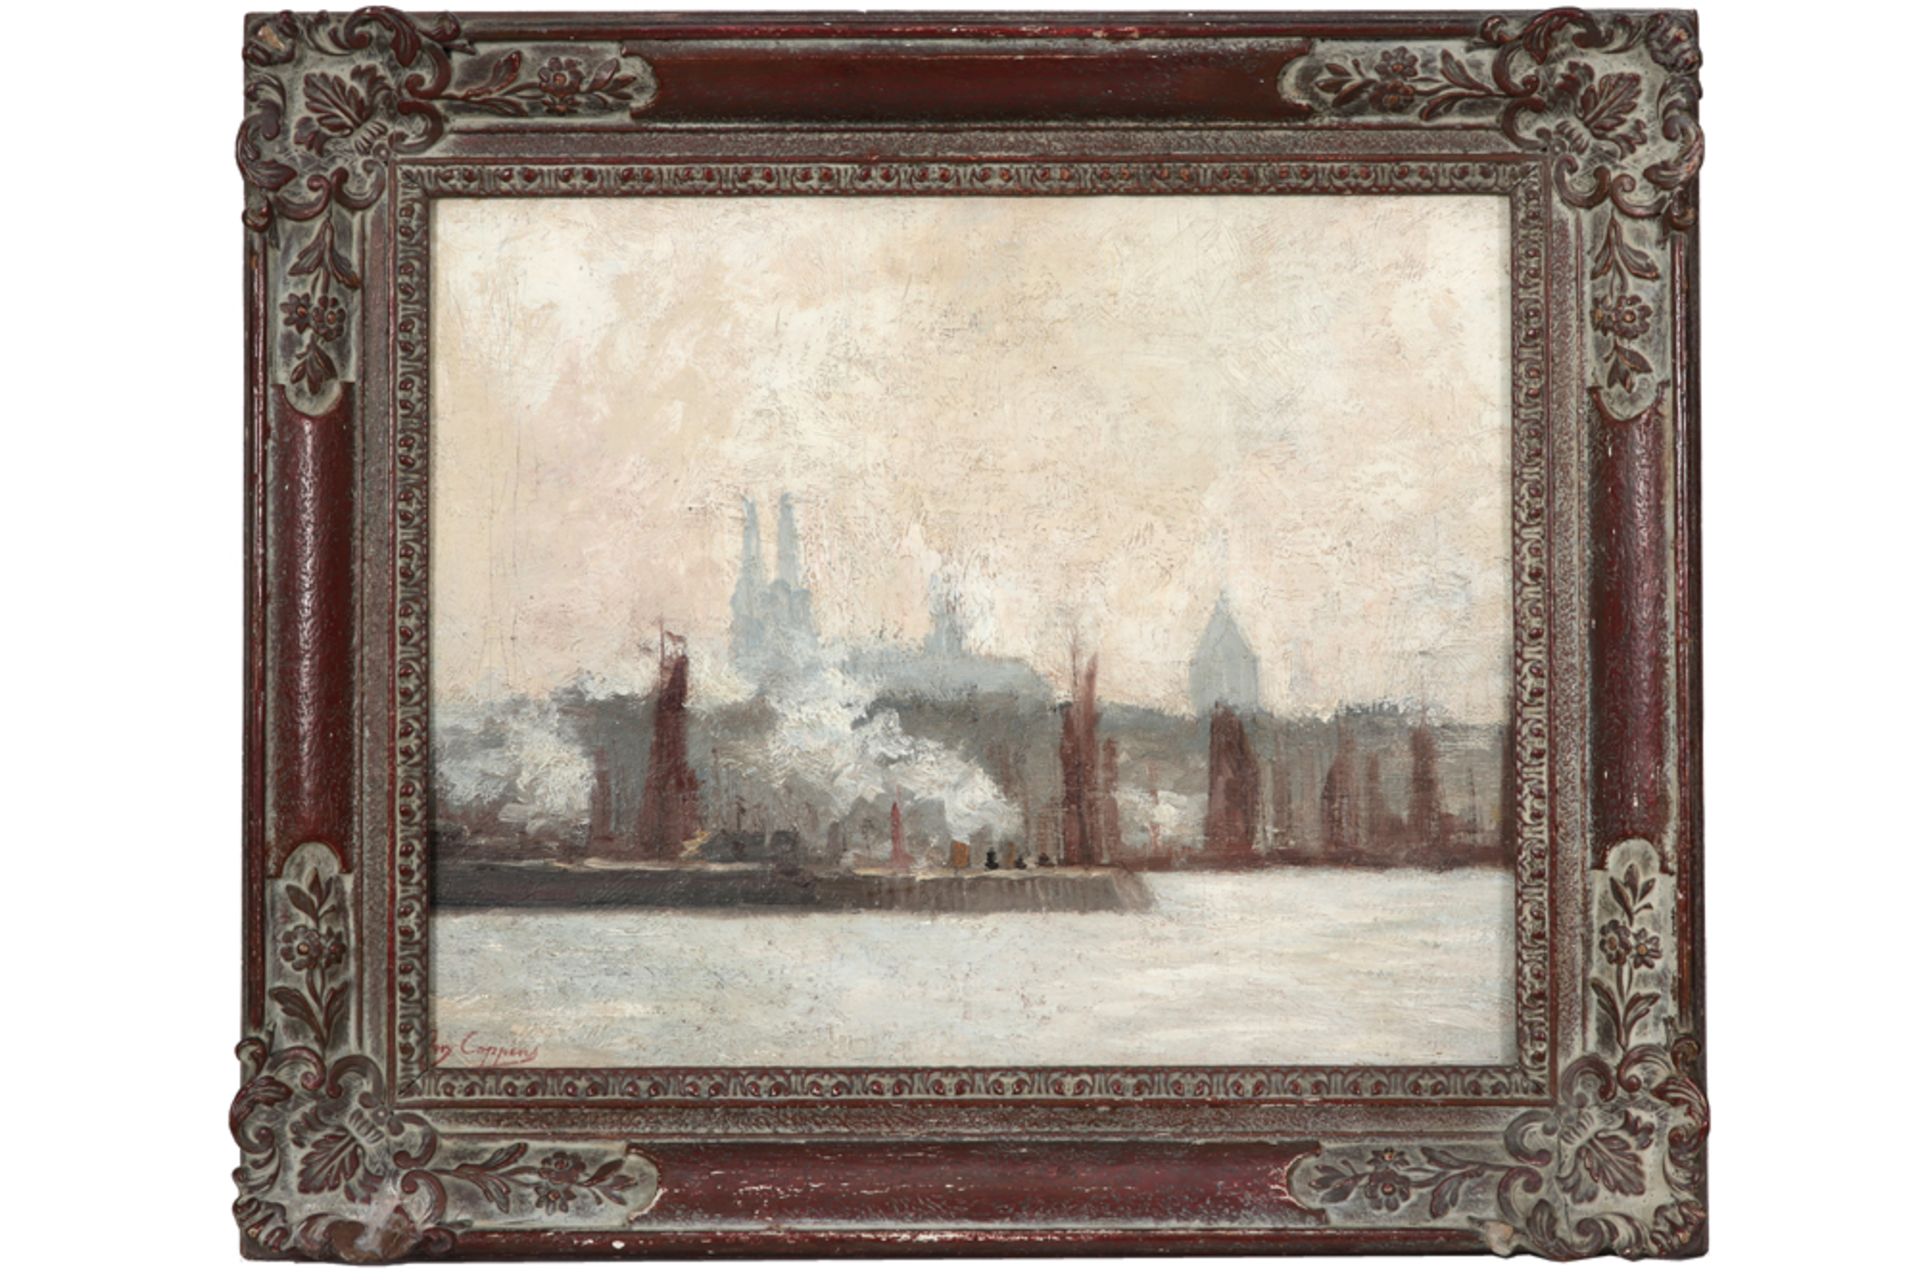 20th Cent. Belgian oil on canvas with a view of the Thames in London - signed Omer Coppens || - Bild 3 aus 4